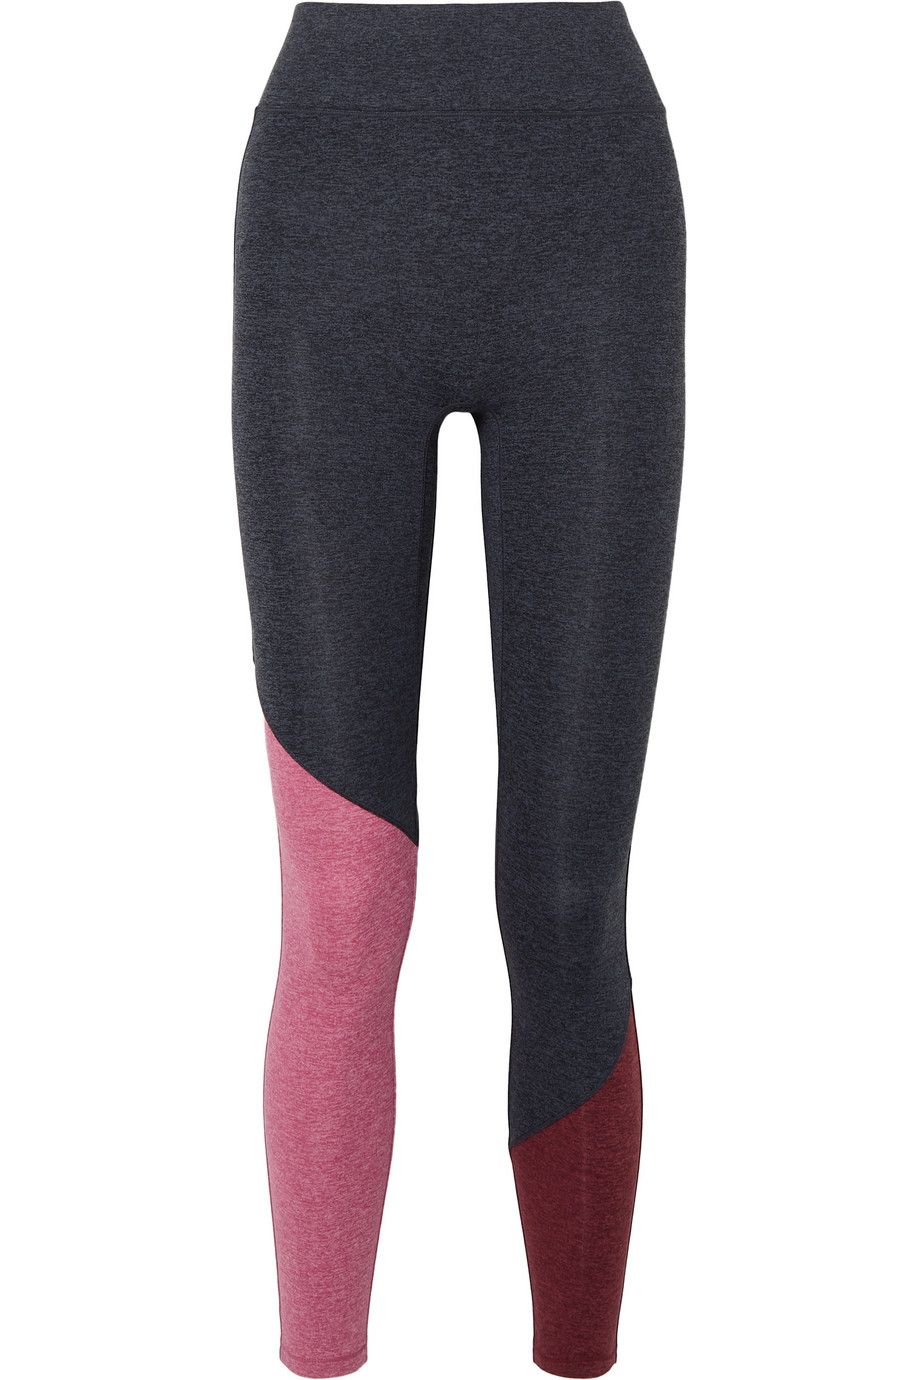 Carbon 38 leggings with stirrups, Women's Fashion, Activewear on